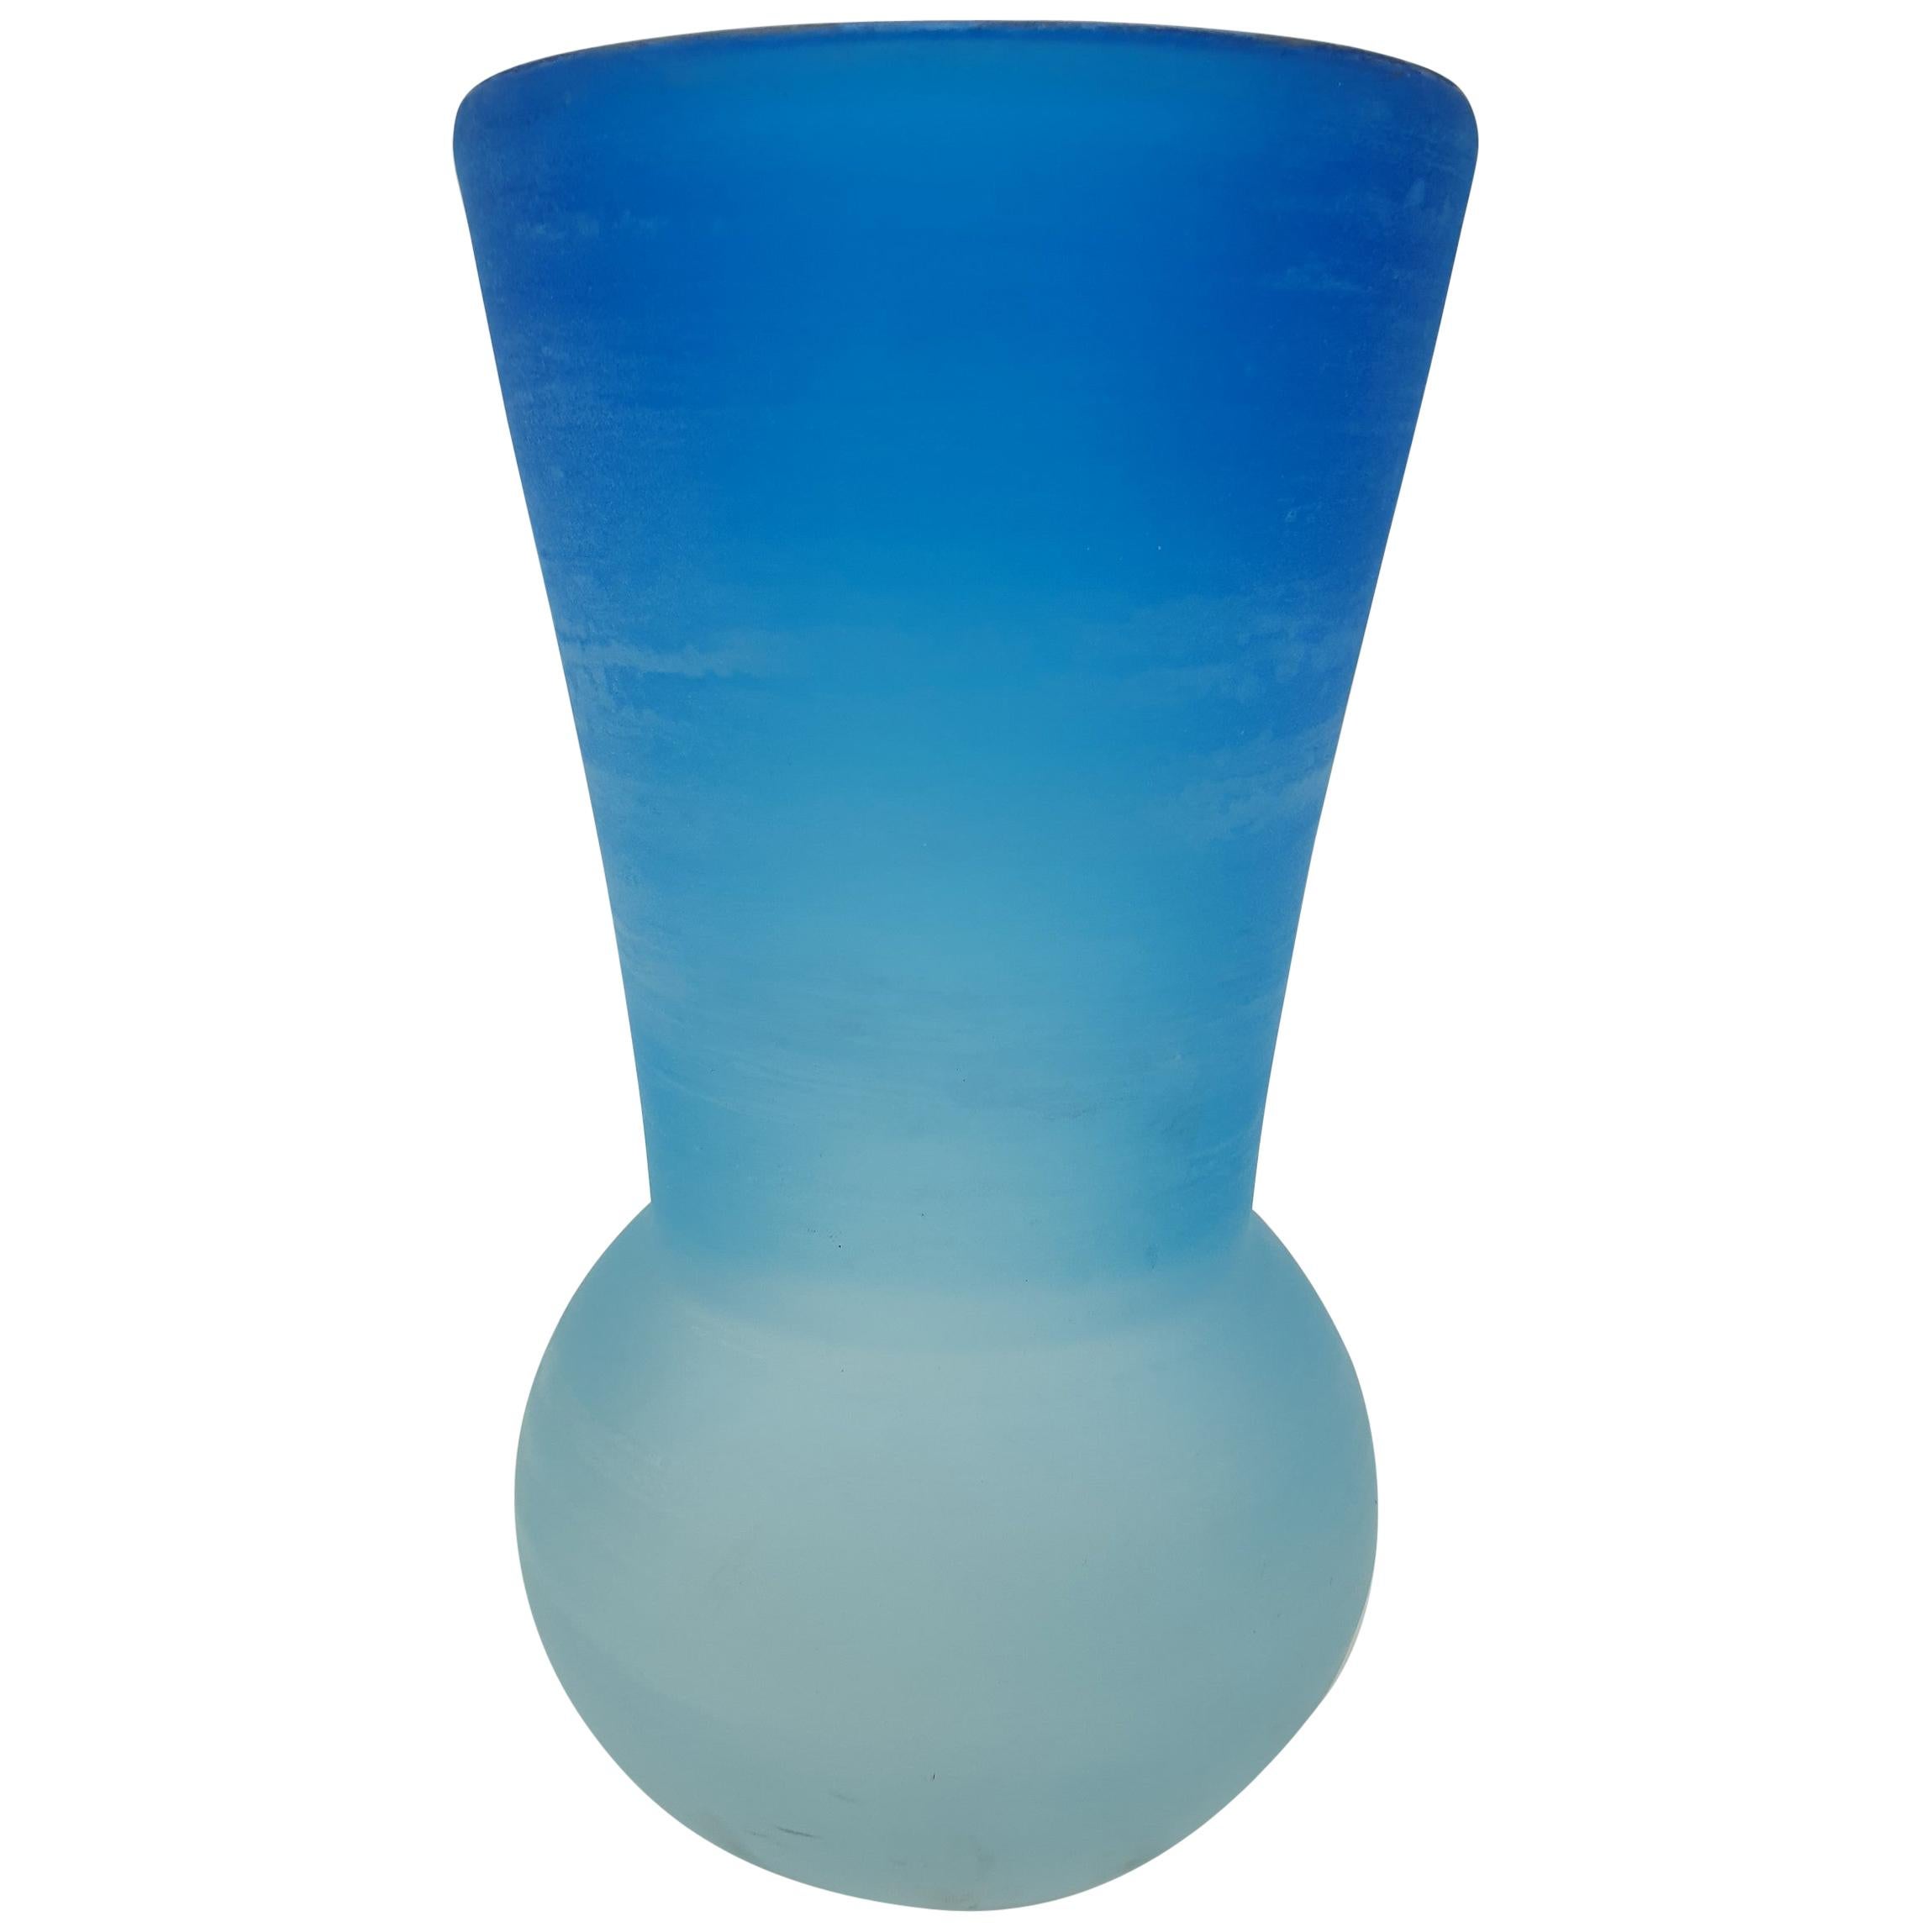 Modern Murano Blue Glass Vase, "Scavo" Finish by Cenedese, Mid-1980s For Sale